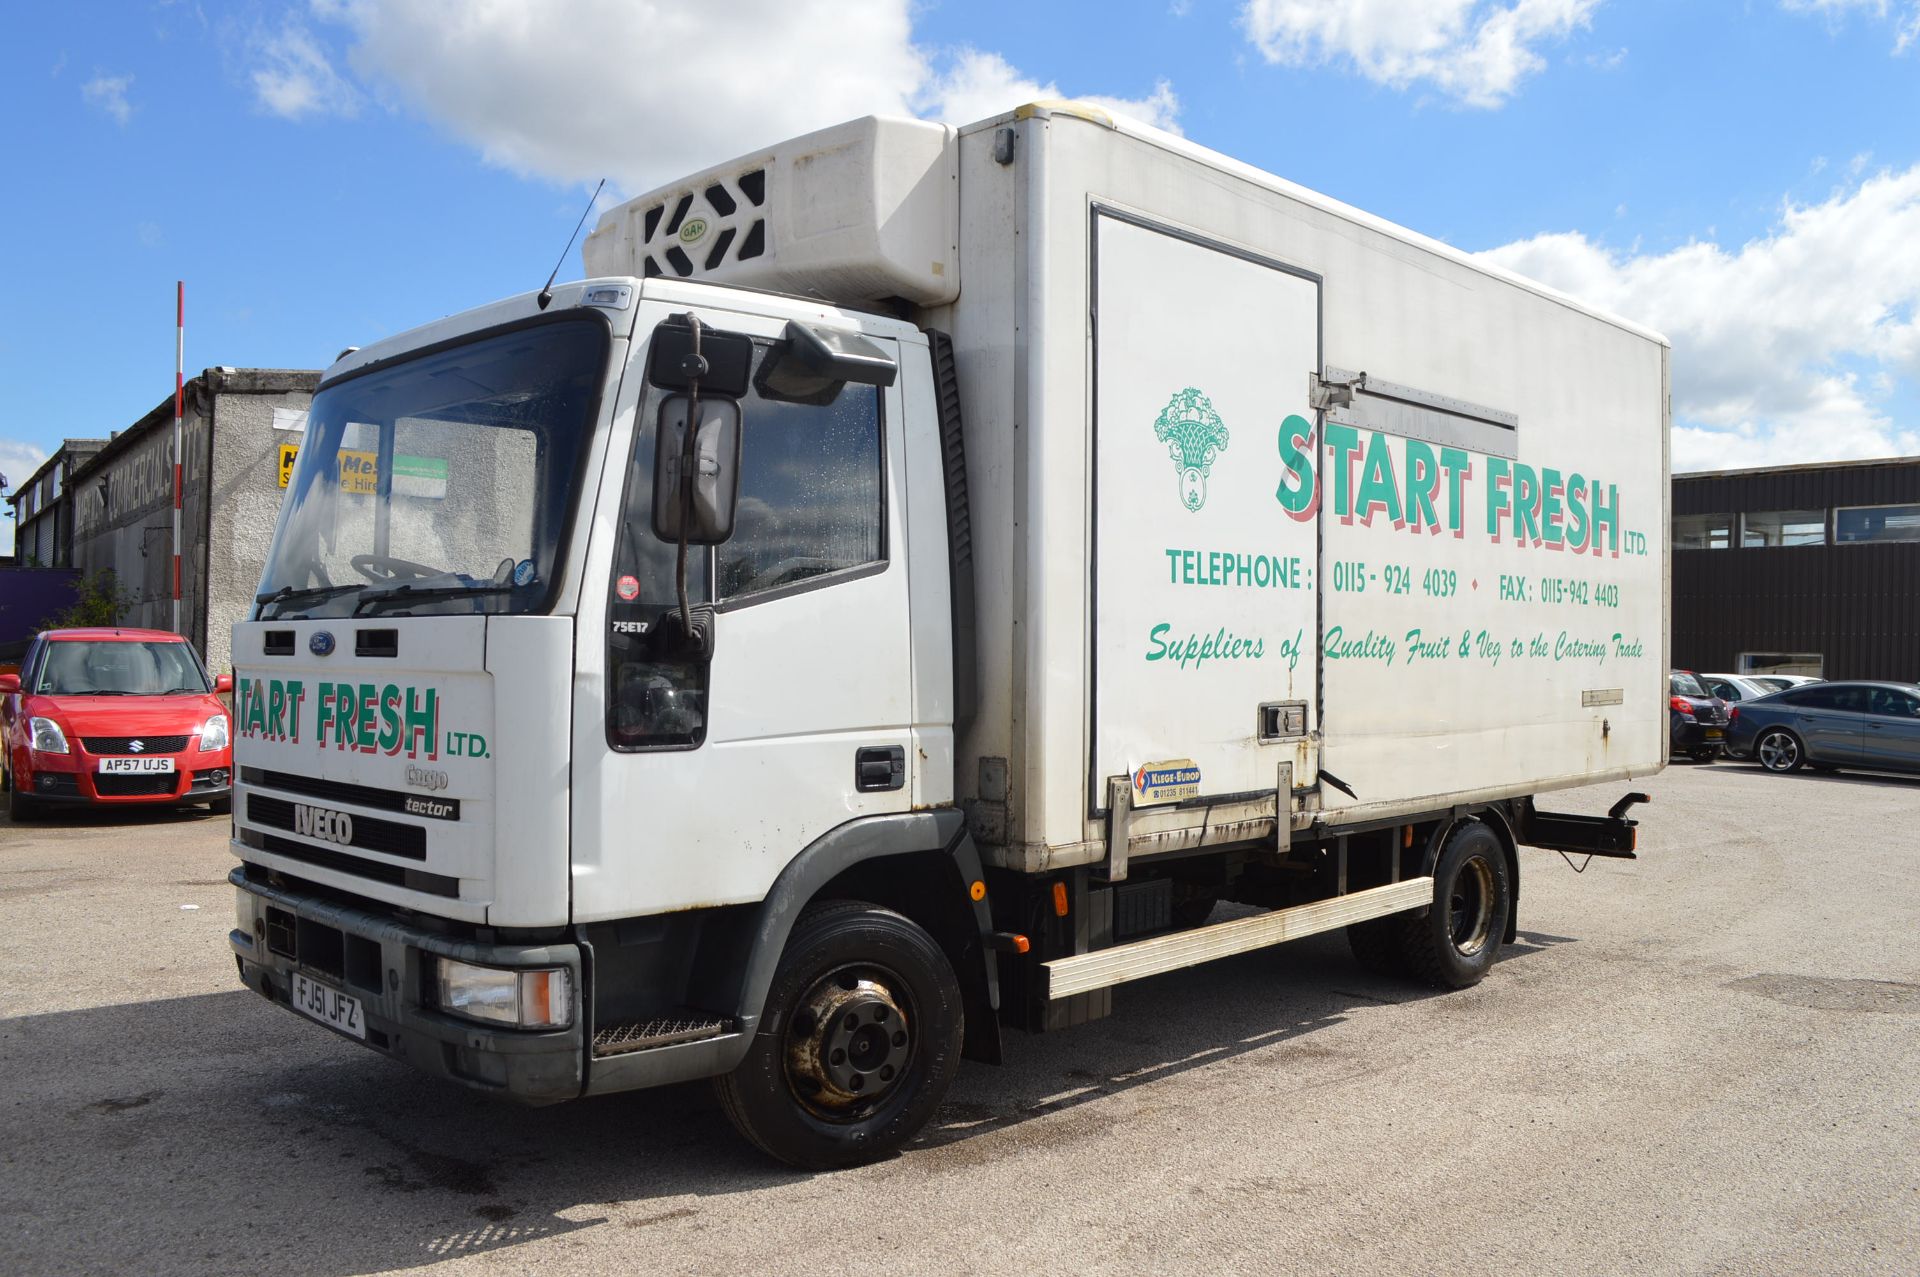 2001/51 REG IVECO-FORD CARGO TECTOR 75E17 REFRIGERATED LORRY - Image 3 of 19